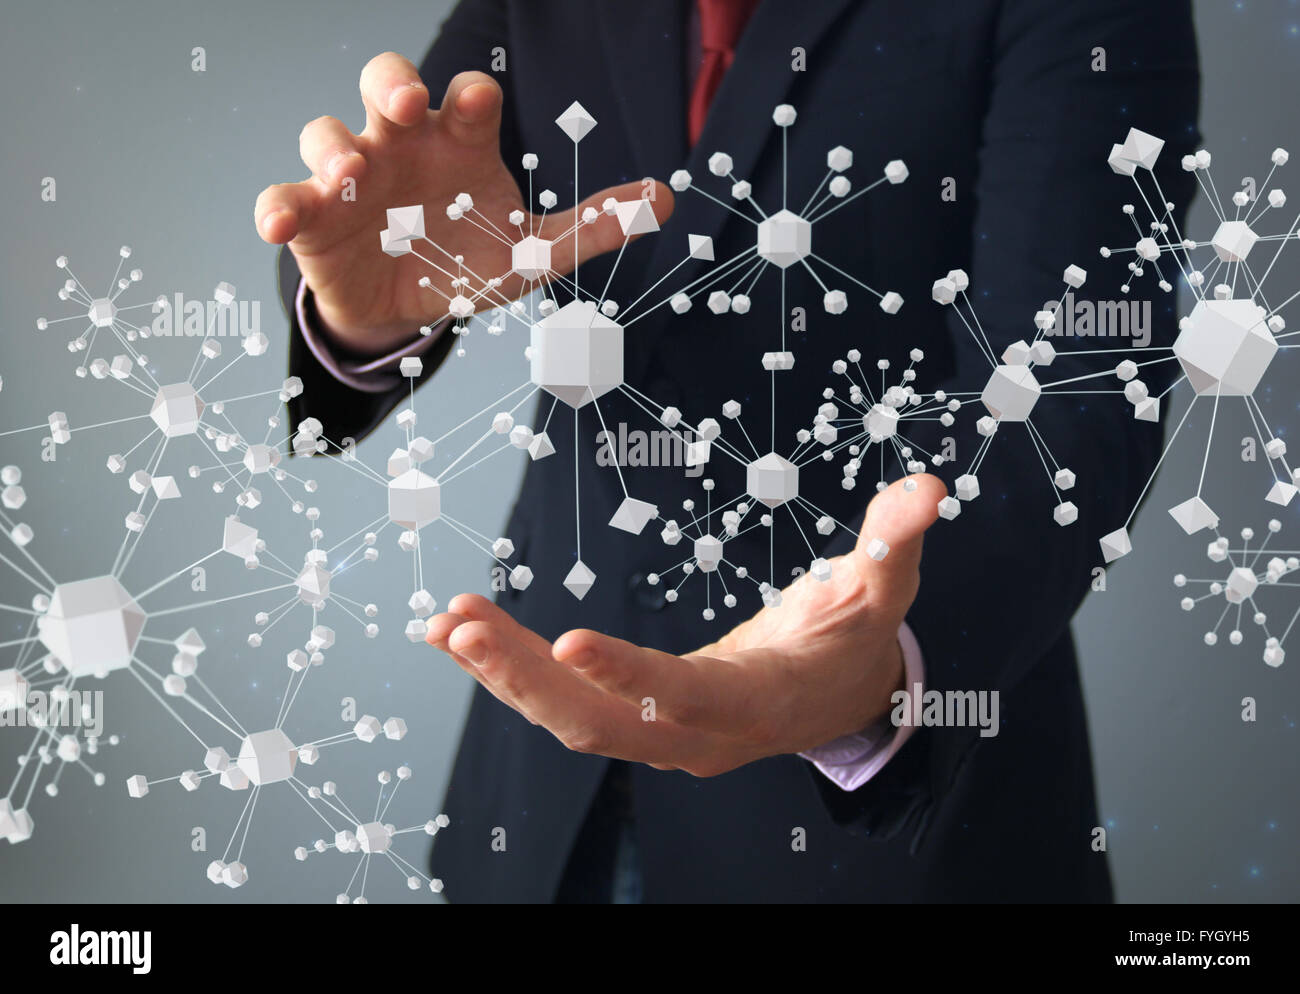 physics or connection concept: businessman with molecular structure on hands Stock Photo